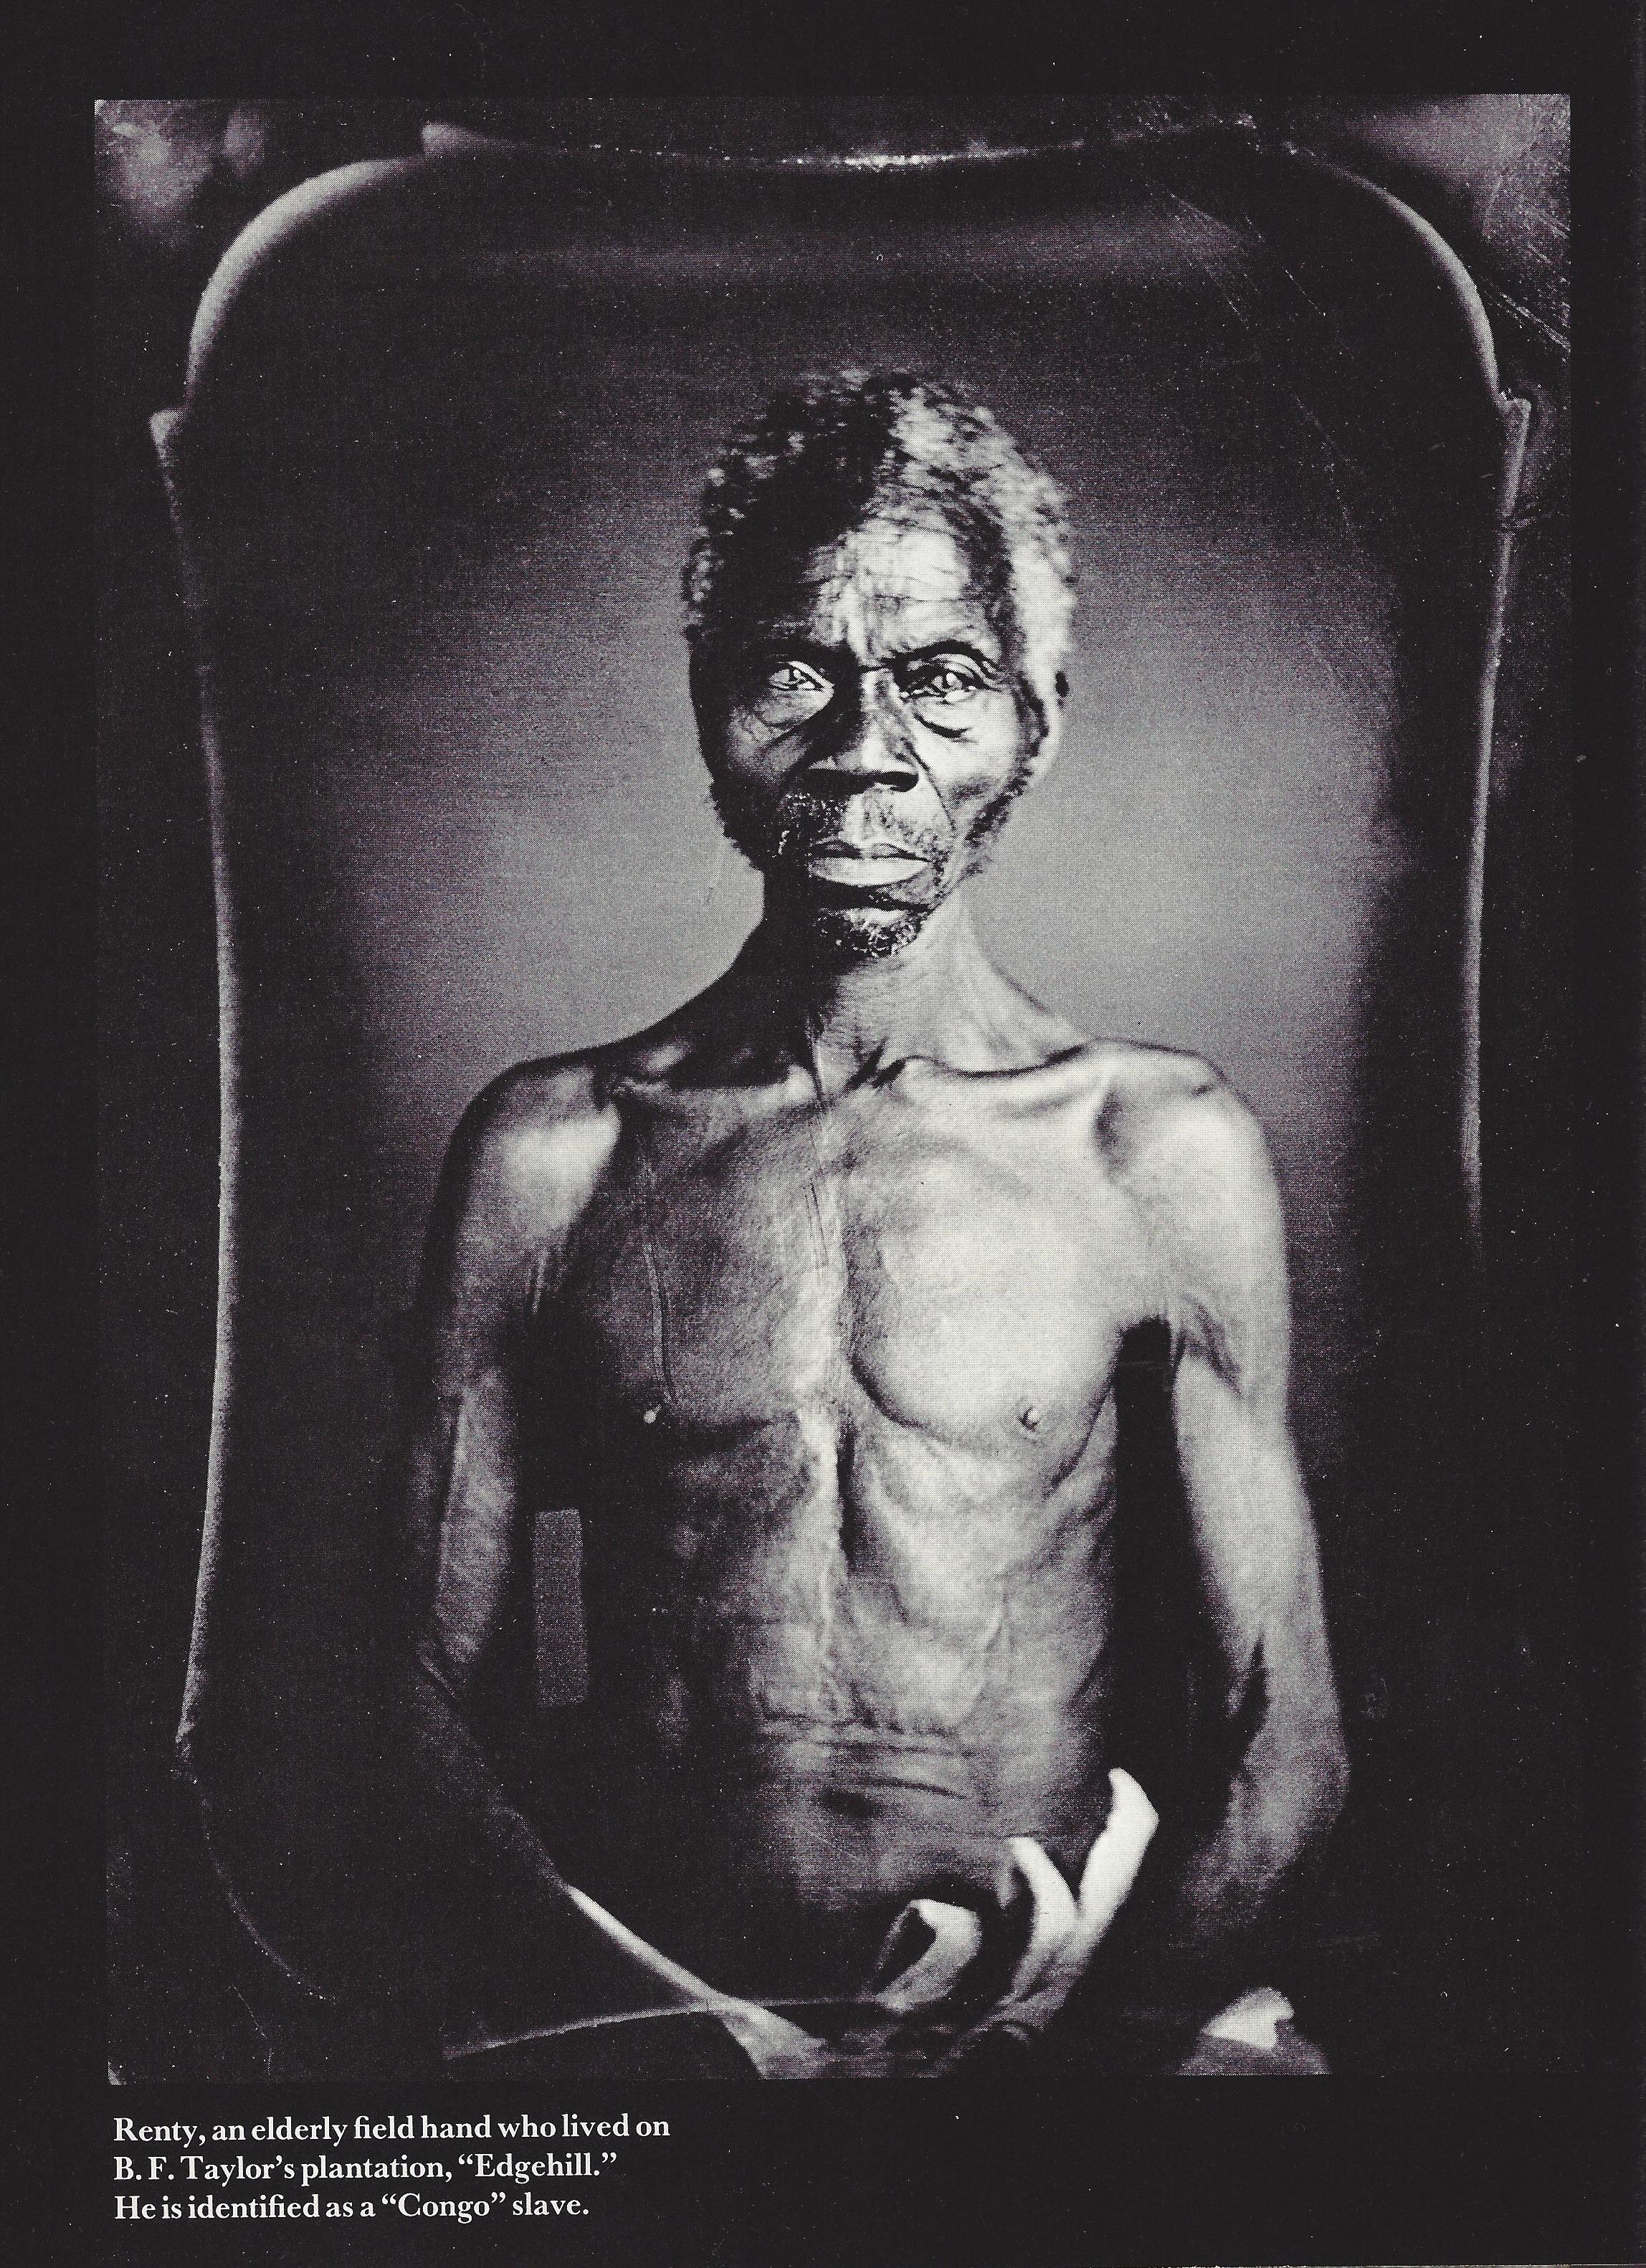 Renty, an elderly field hand who lived on B.F. Taylor's plantation, "Edgehill." He is identified as a "Congo" slave.